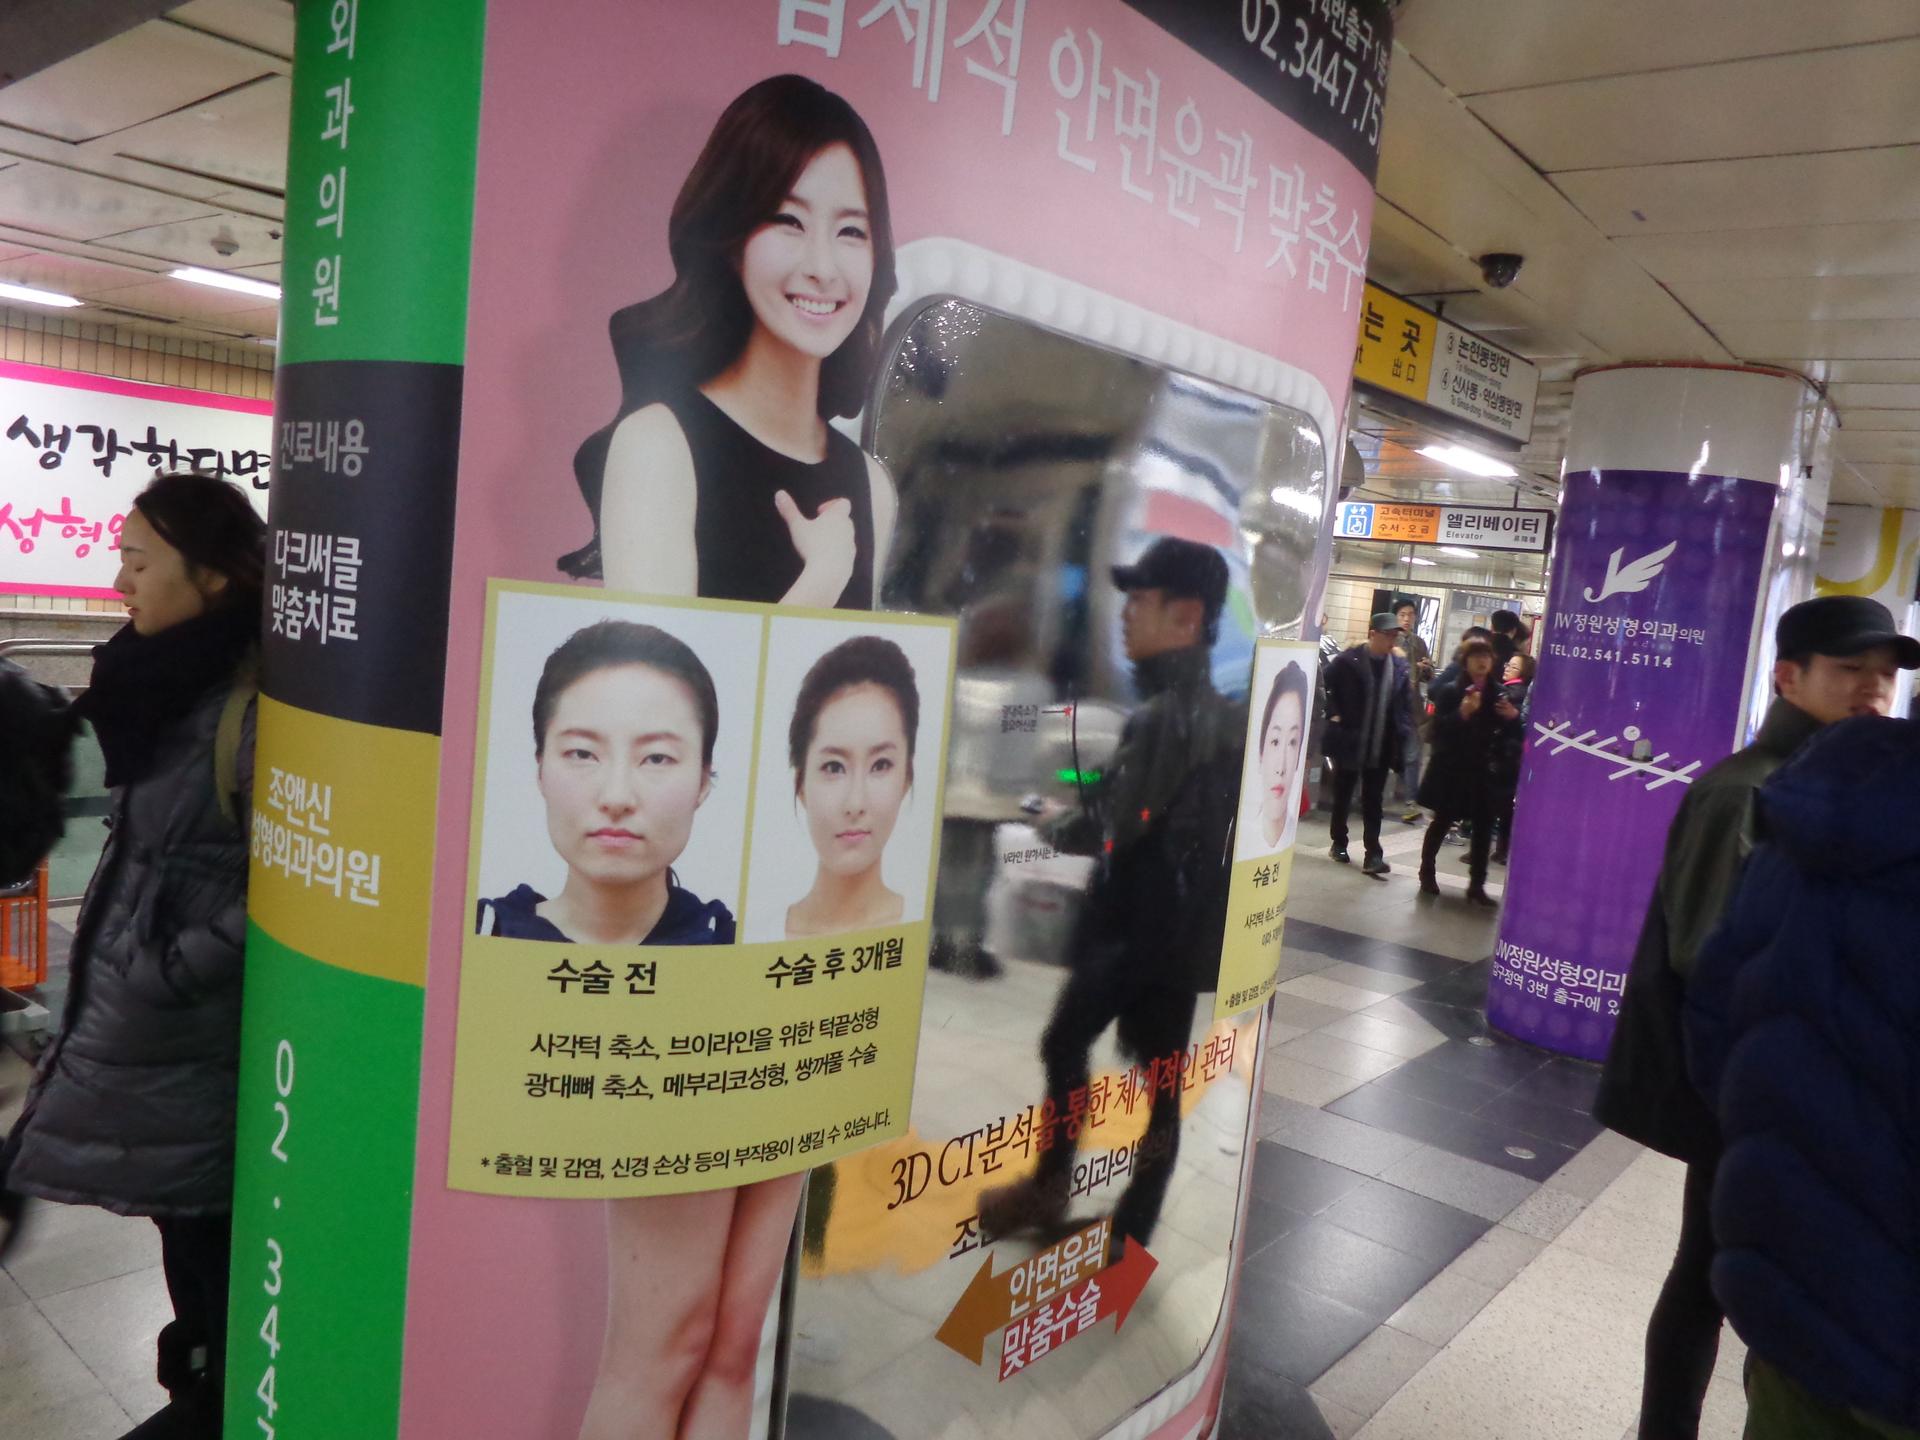 One of many ads for plastic surgery in a Seoul subway station.